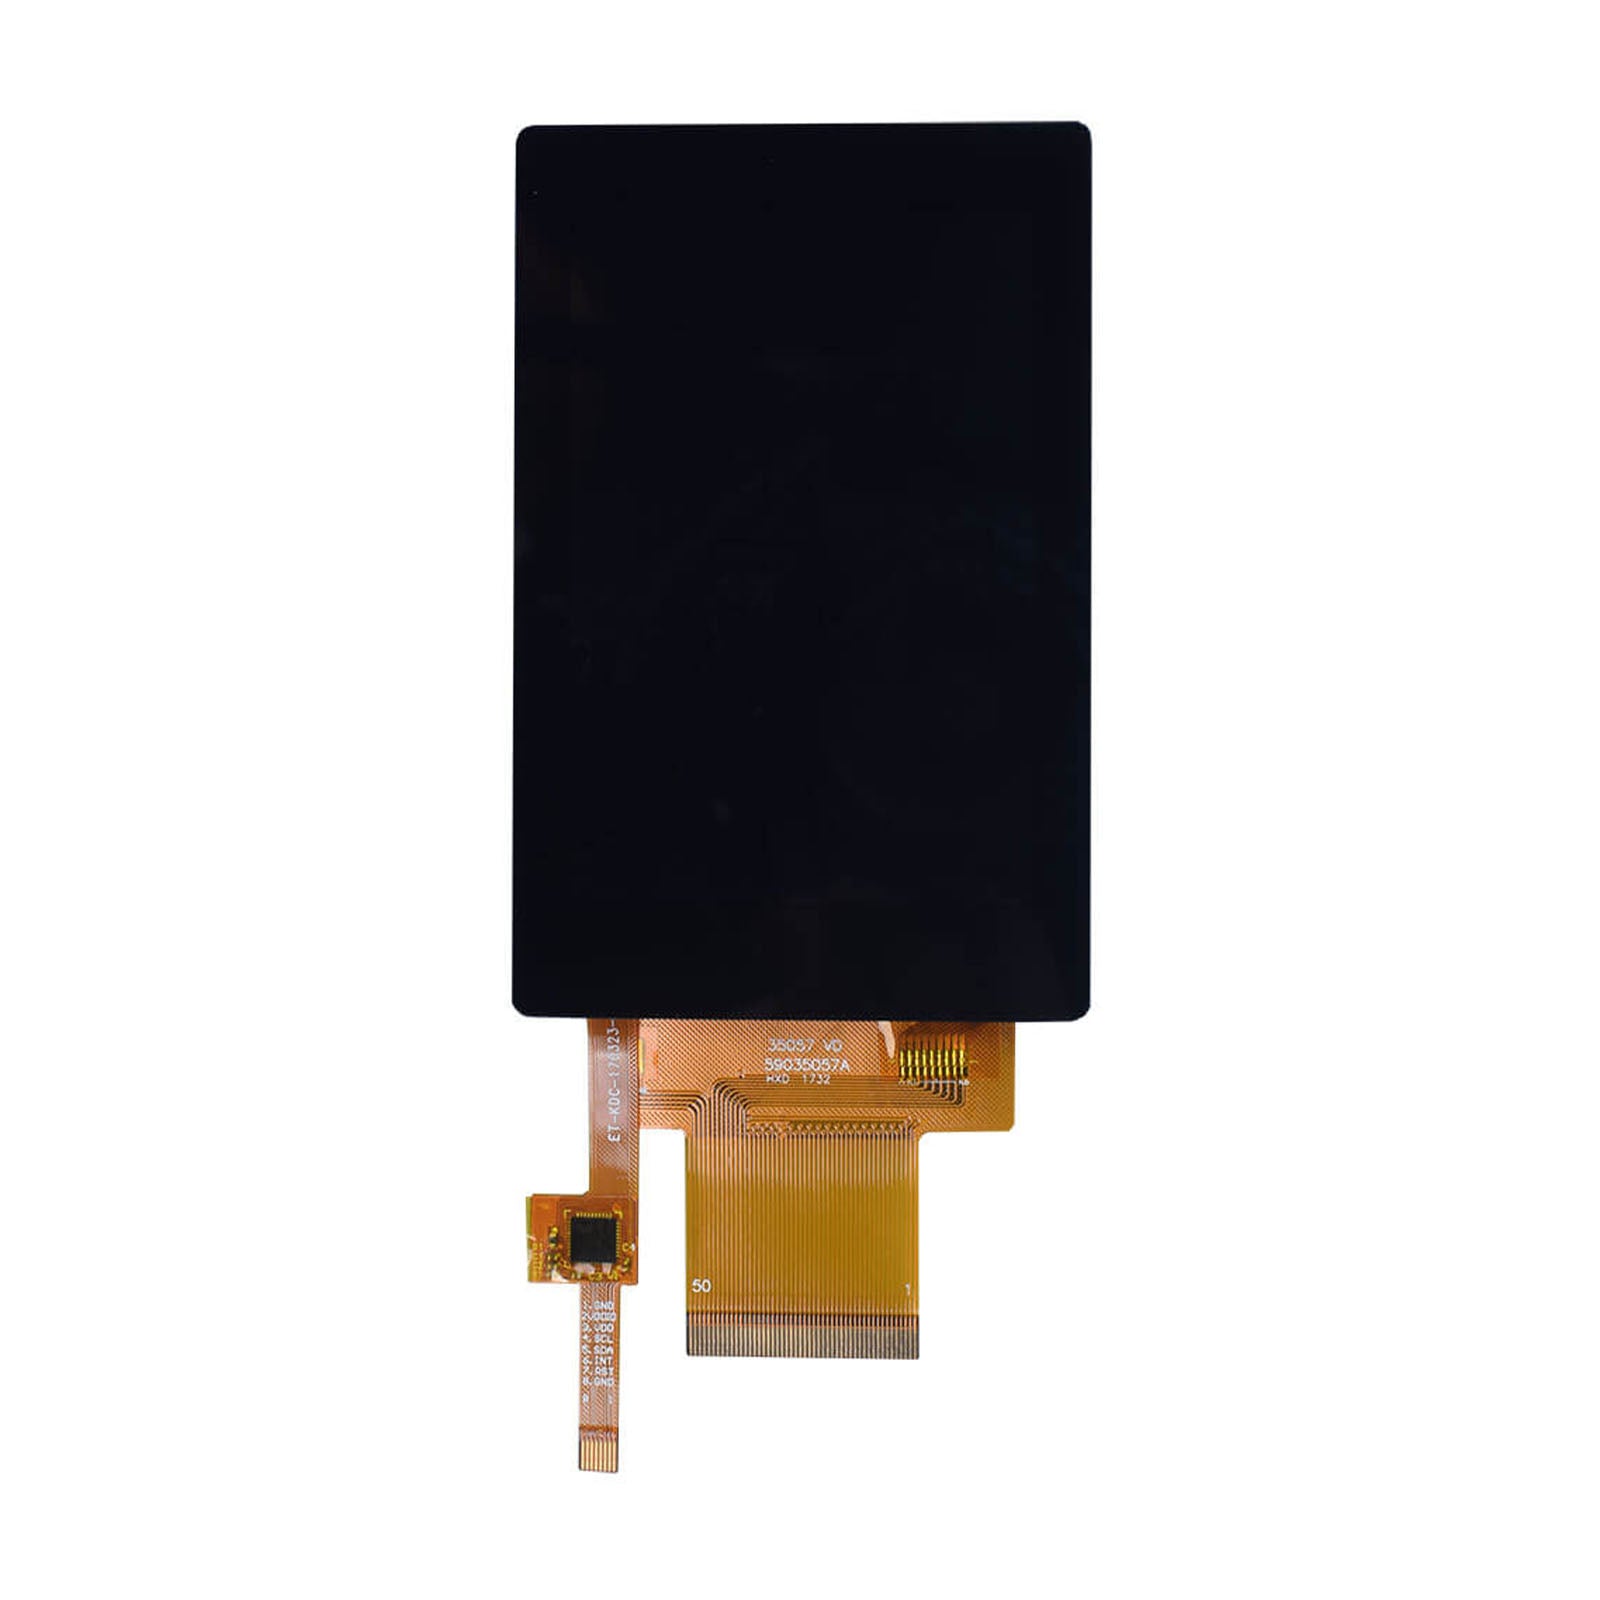 3.5-inch IPS display panel with 320x480 resolution, capacitive touch, supporting SPI, MCU, and RGB interfaces